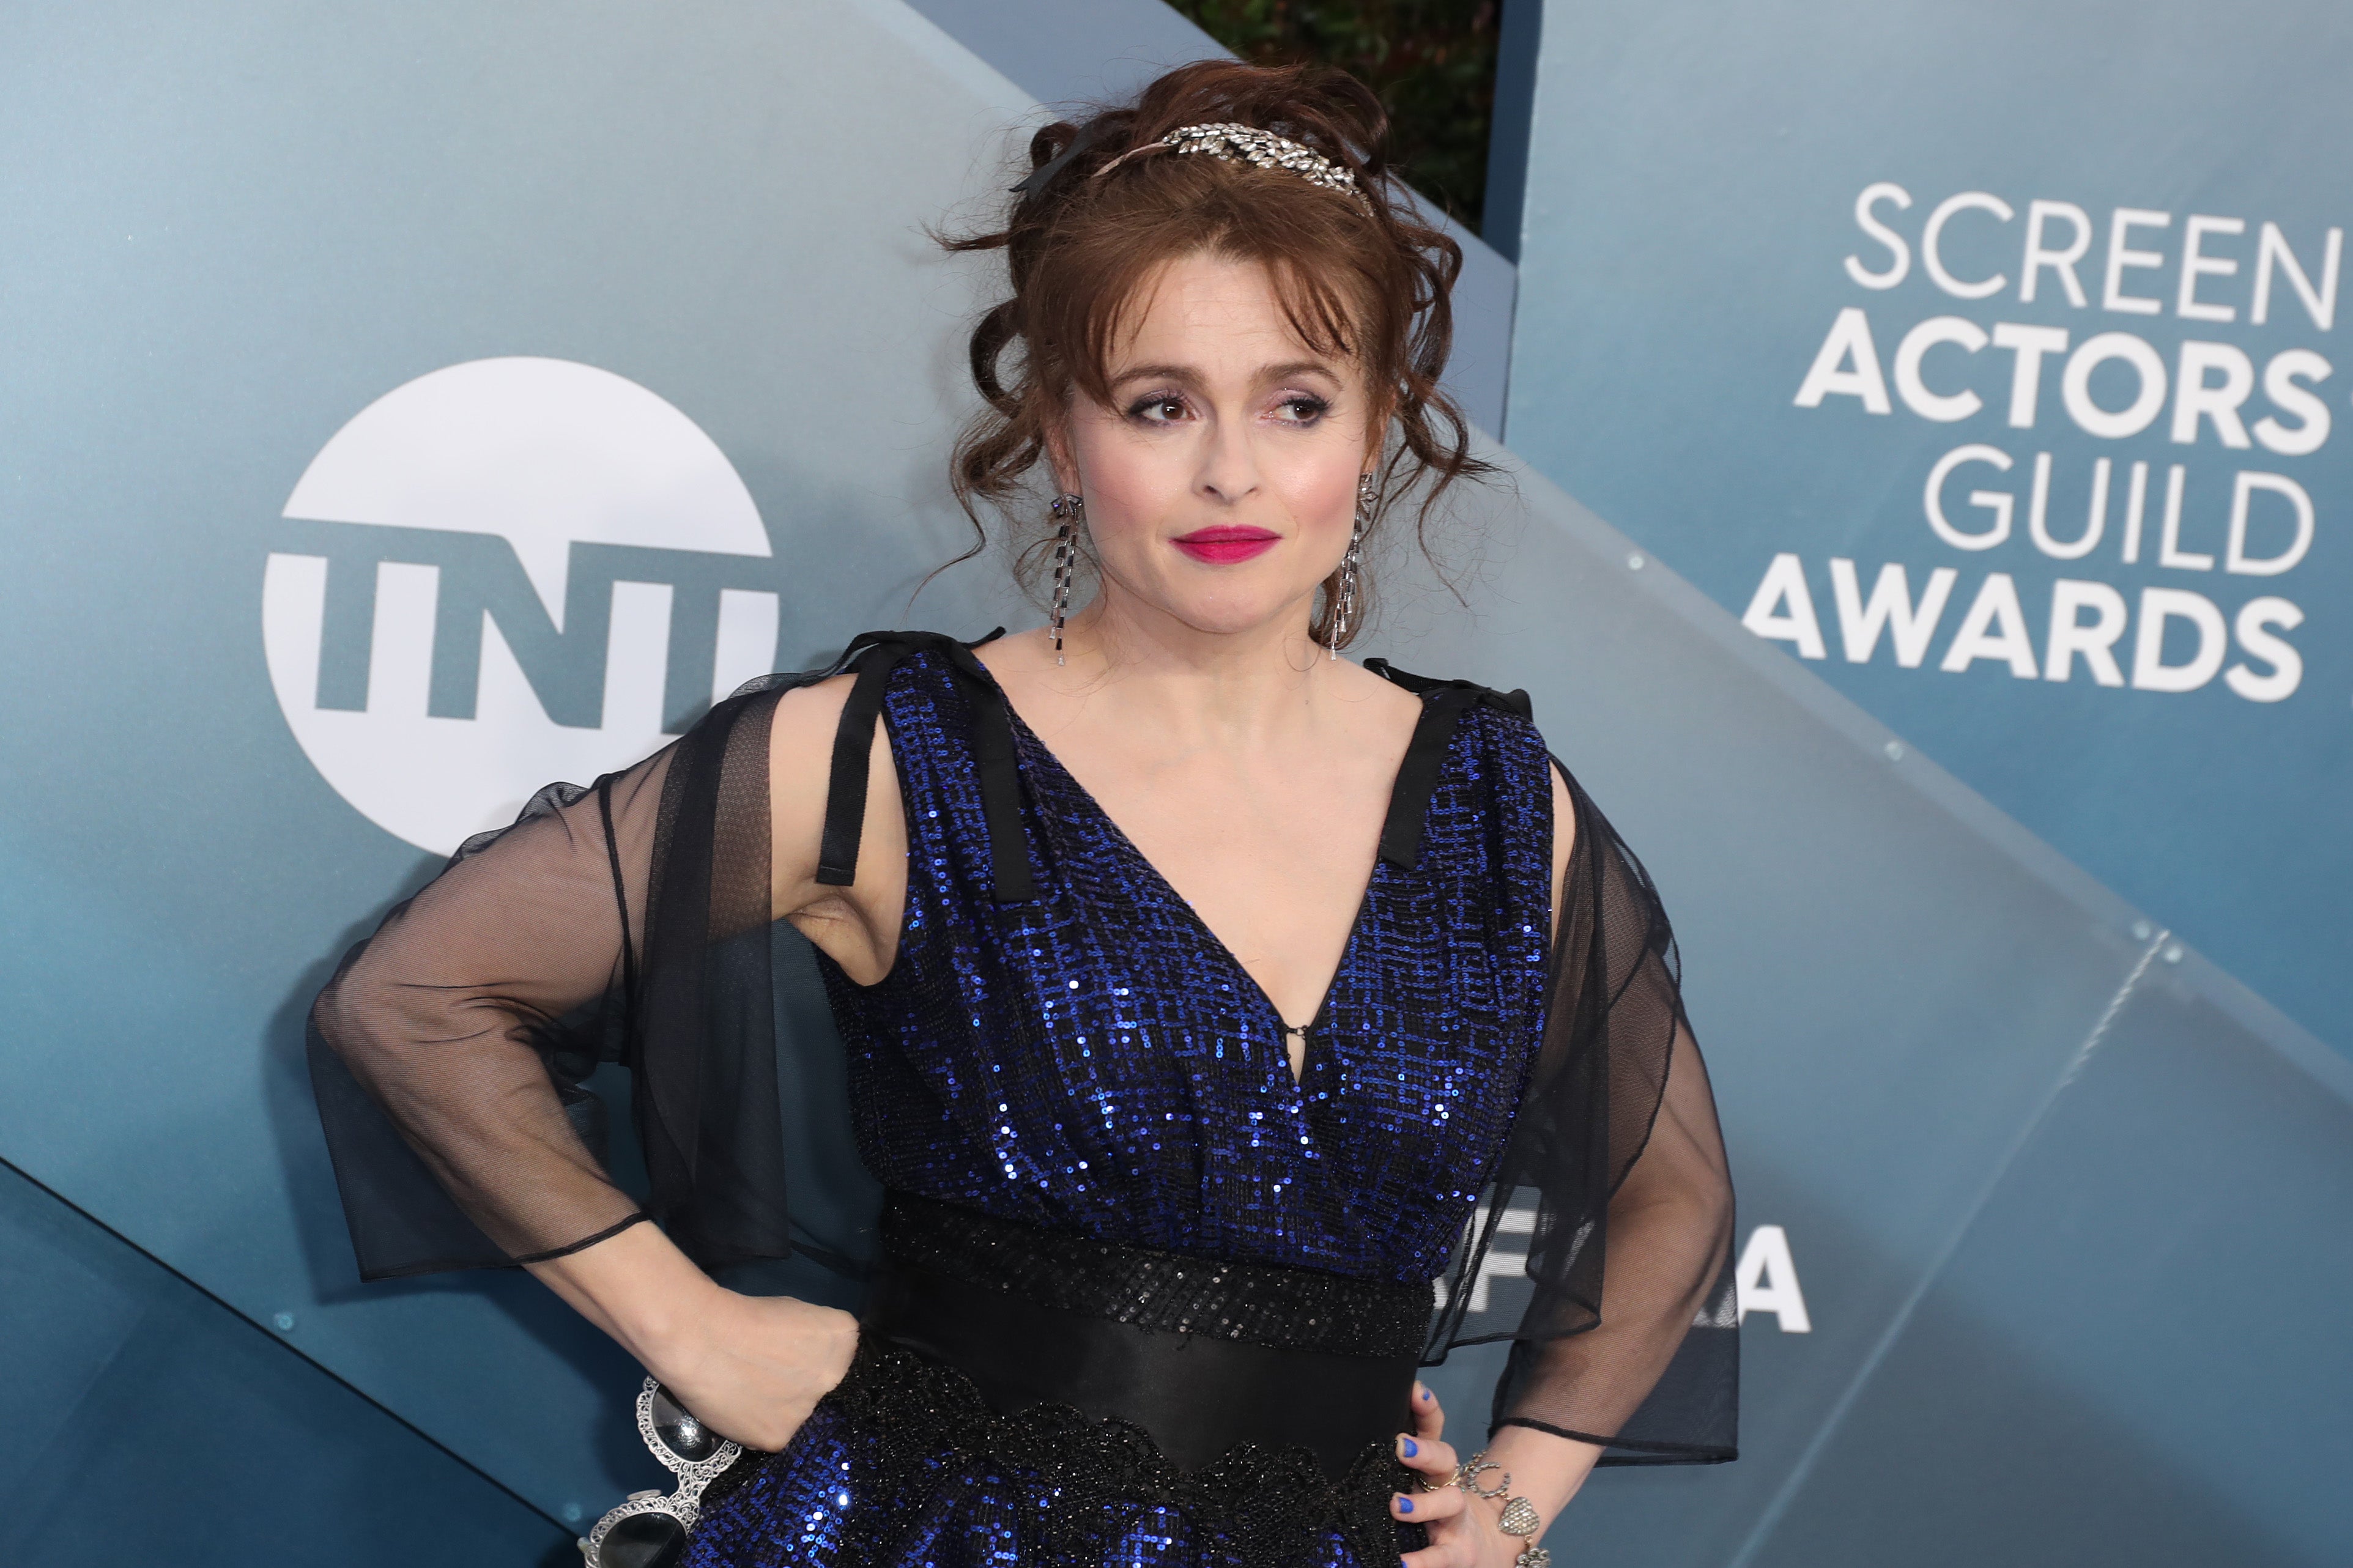 Helena Bonham Carter pictured earlier this year at the 26th Annual Screen Actors Guild Awards in January